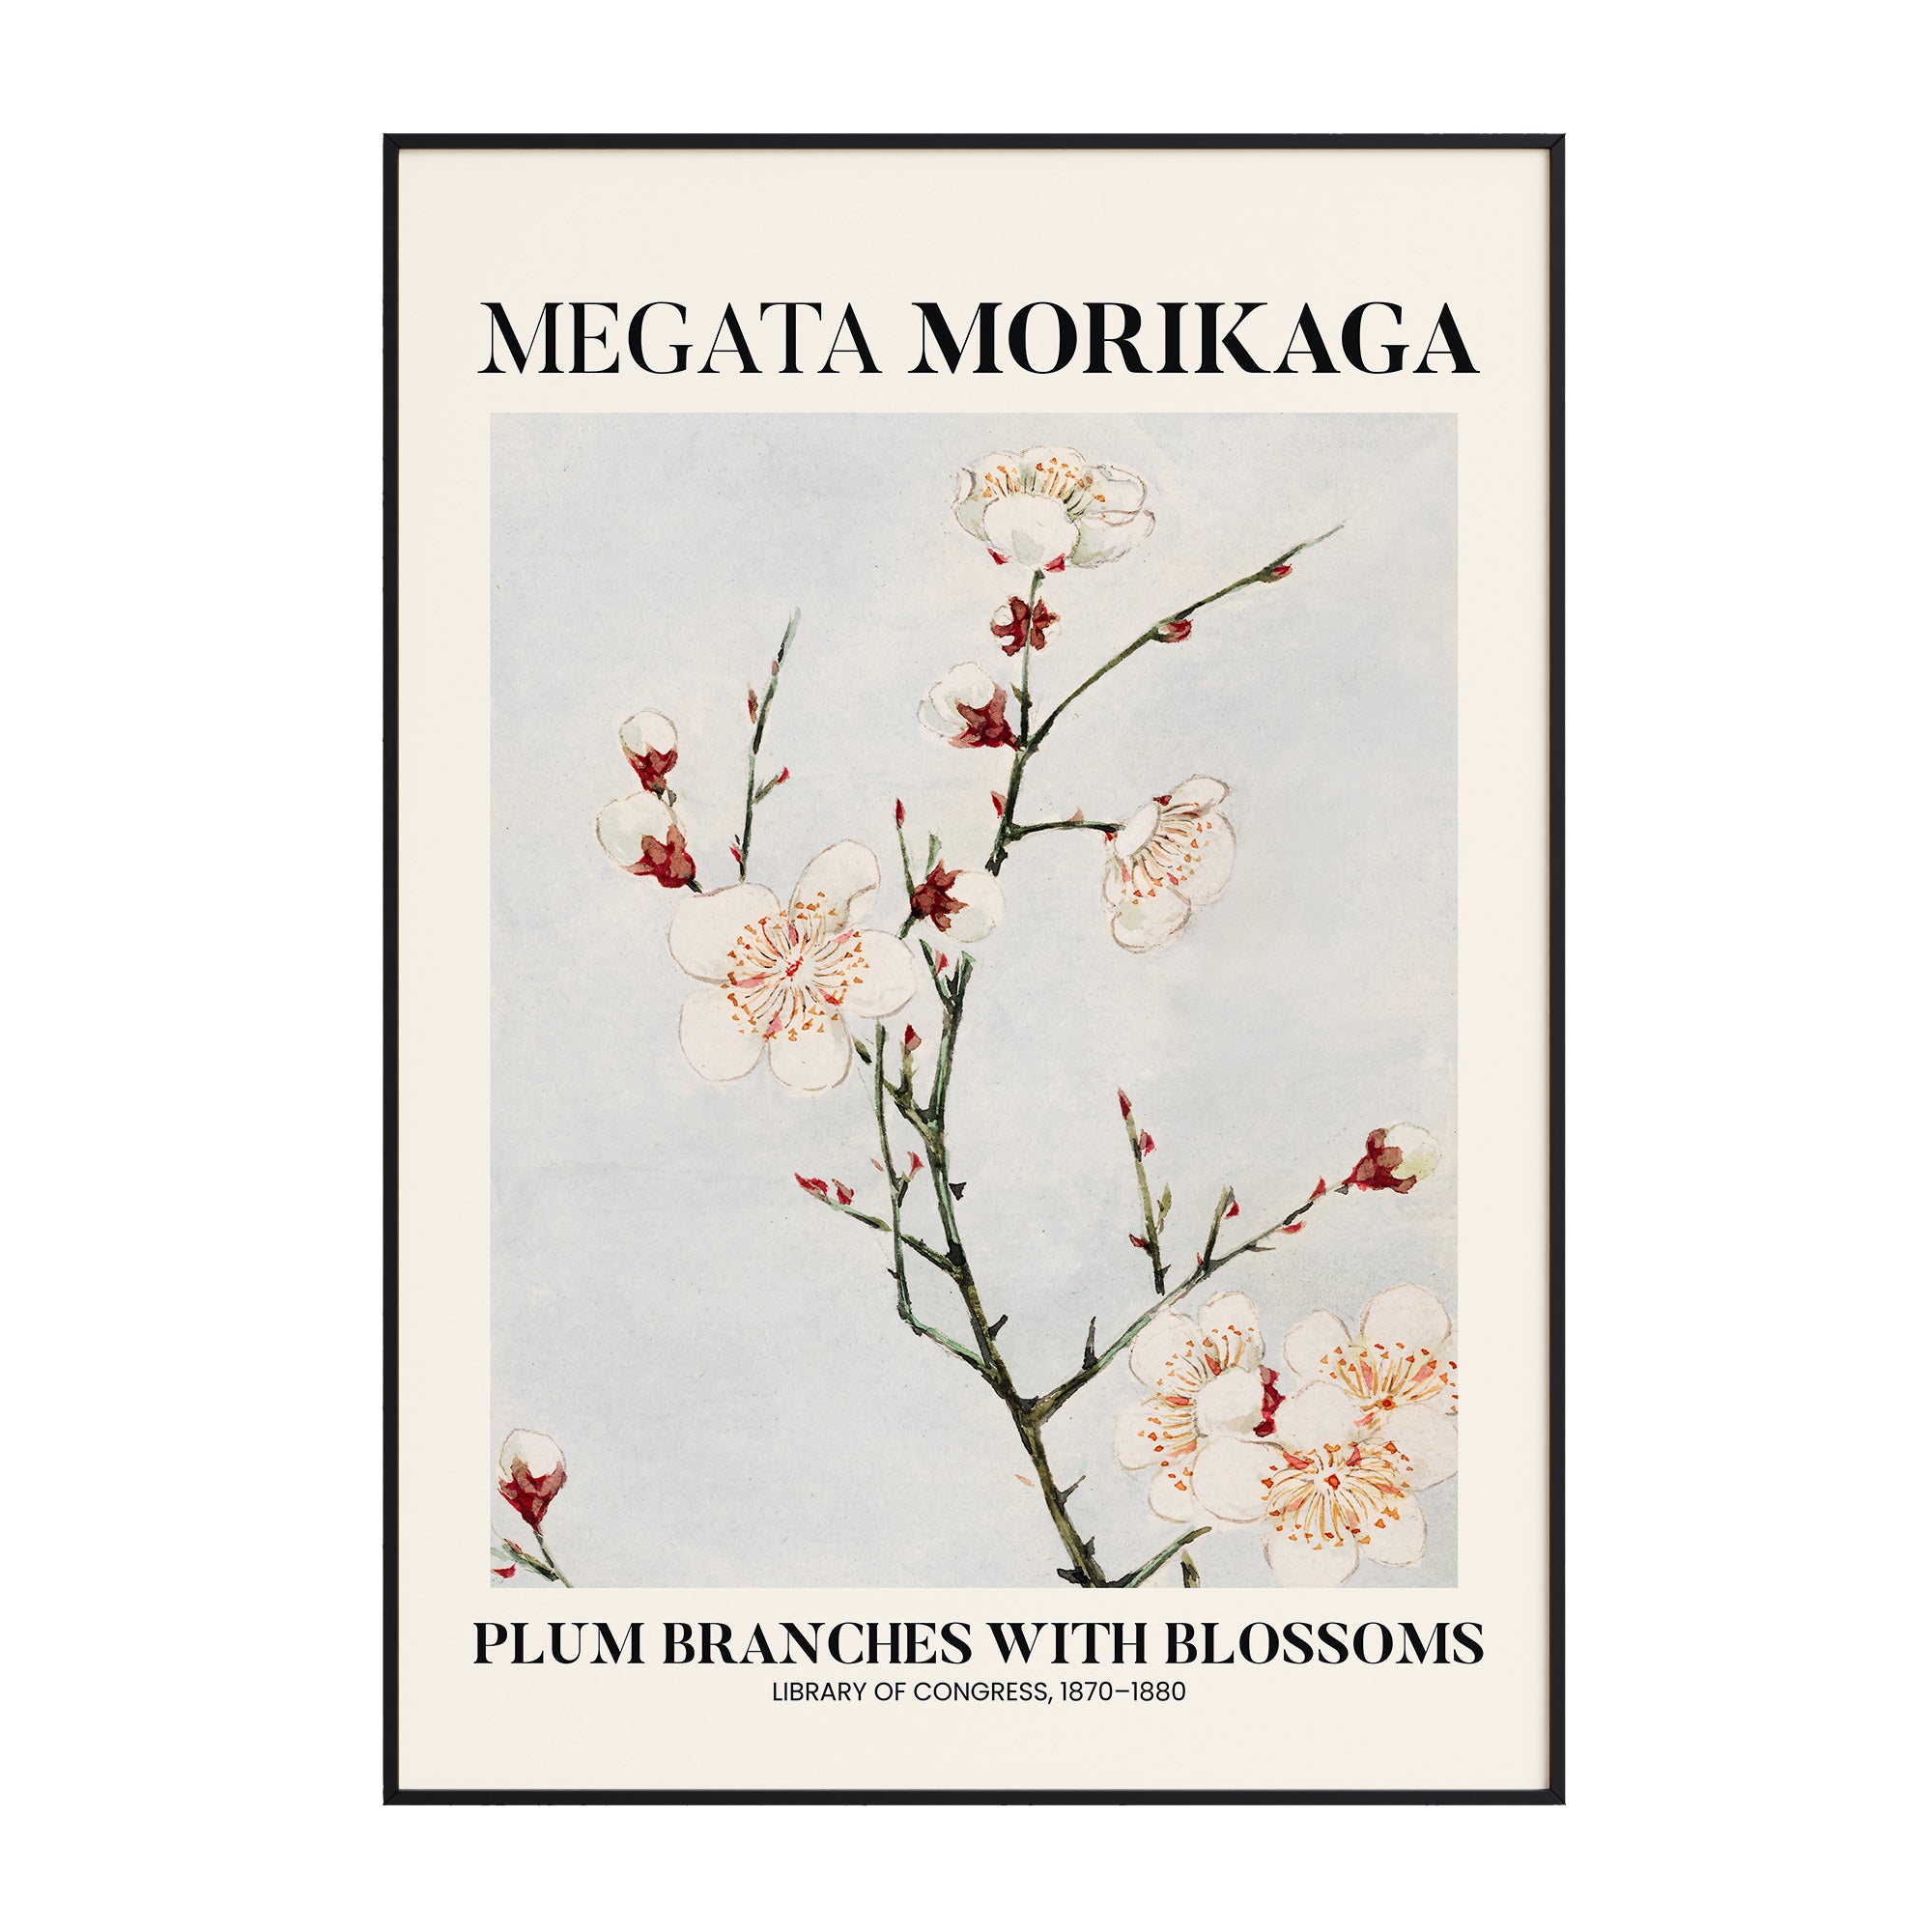 Megata Morikaga - Plum Branches With Blossoms During